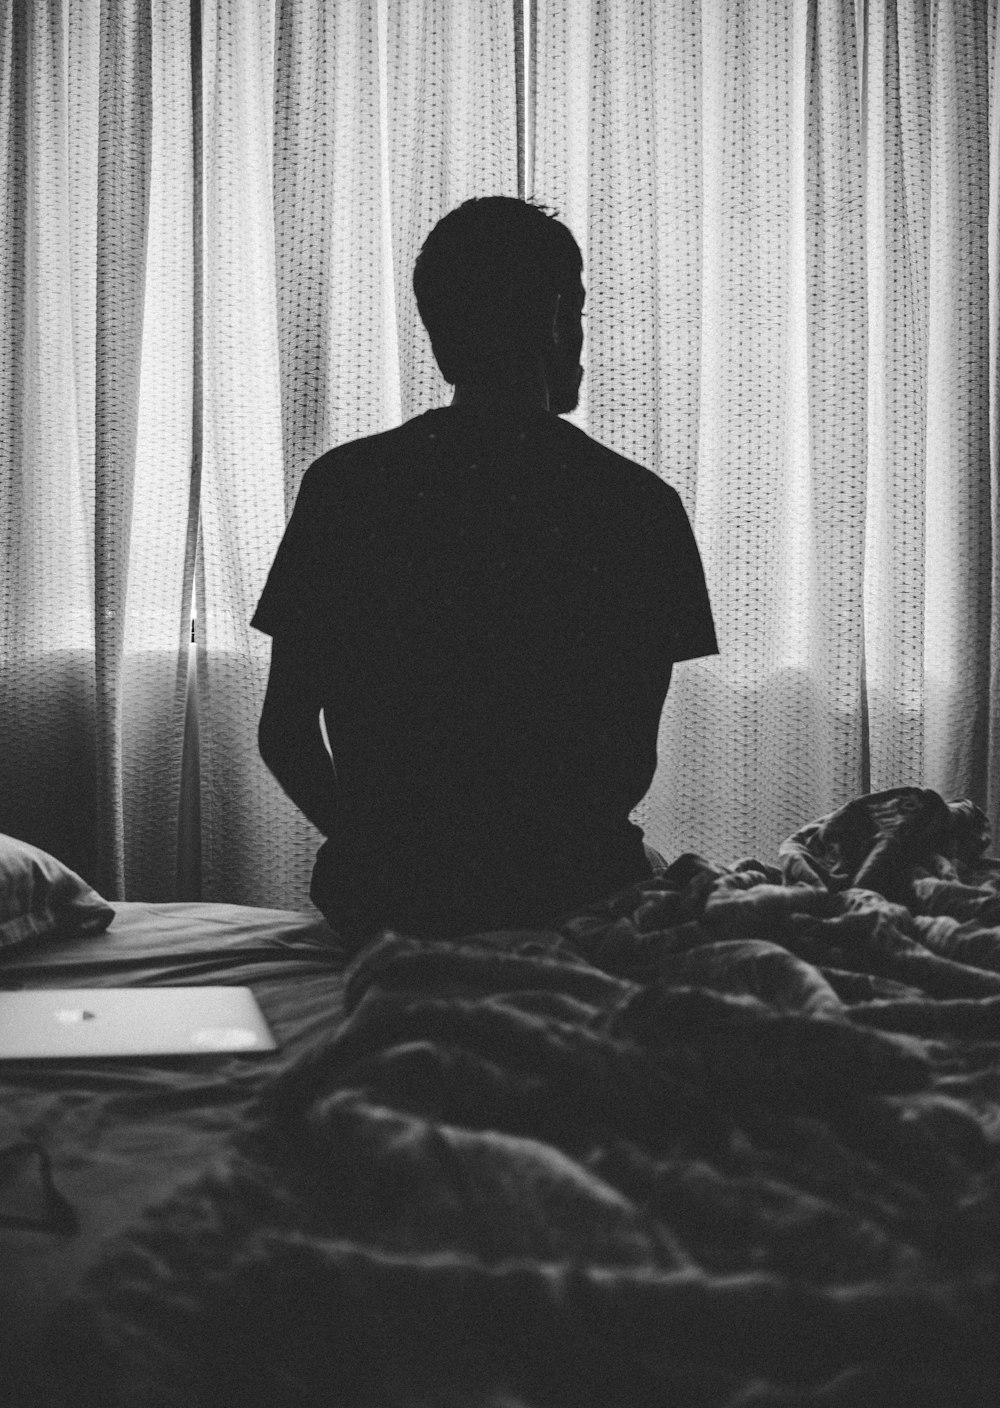 grayscale photography of man sitting on bed